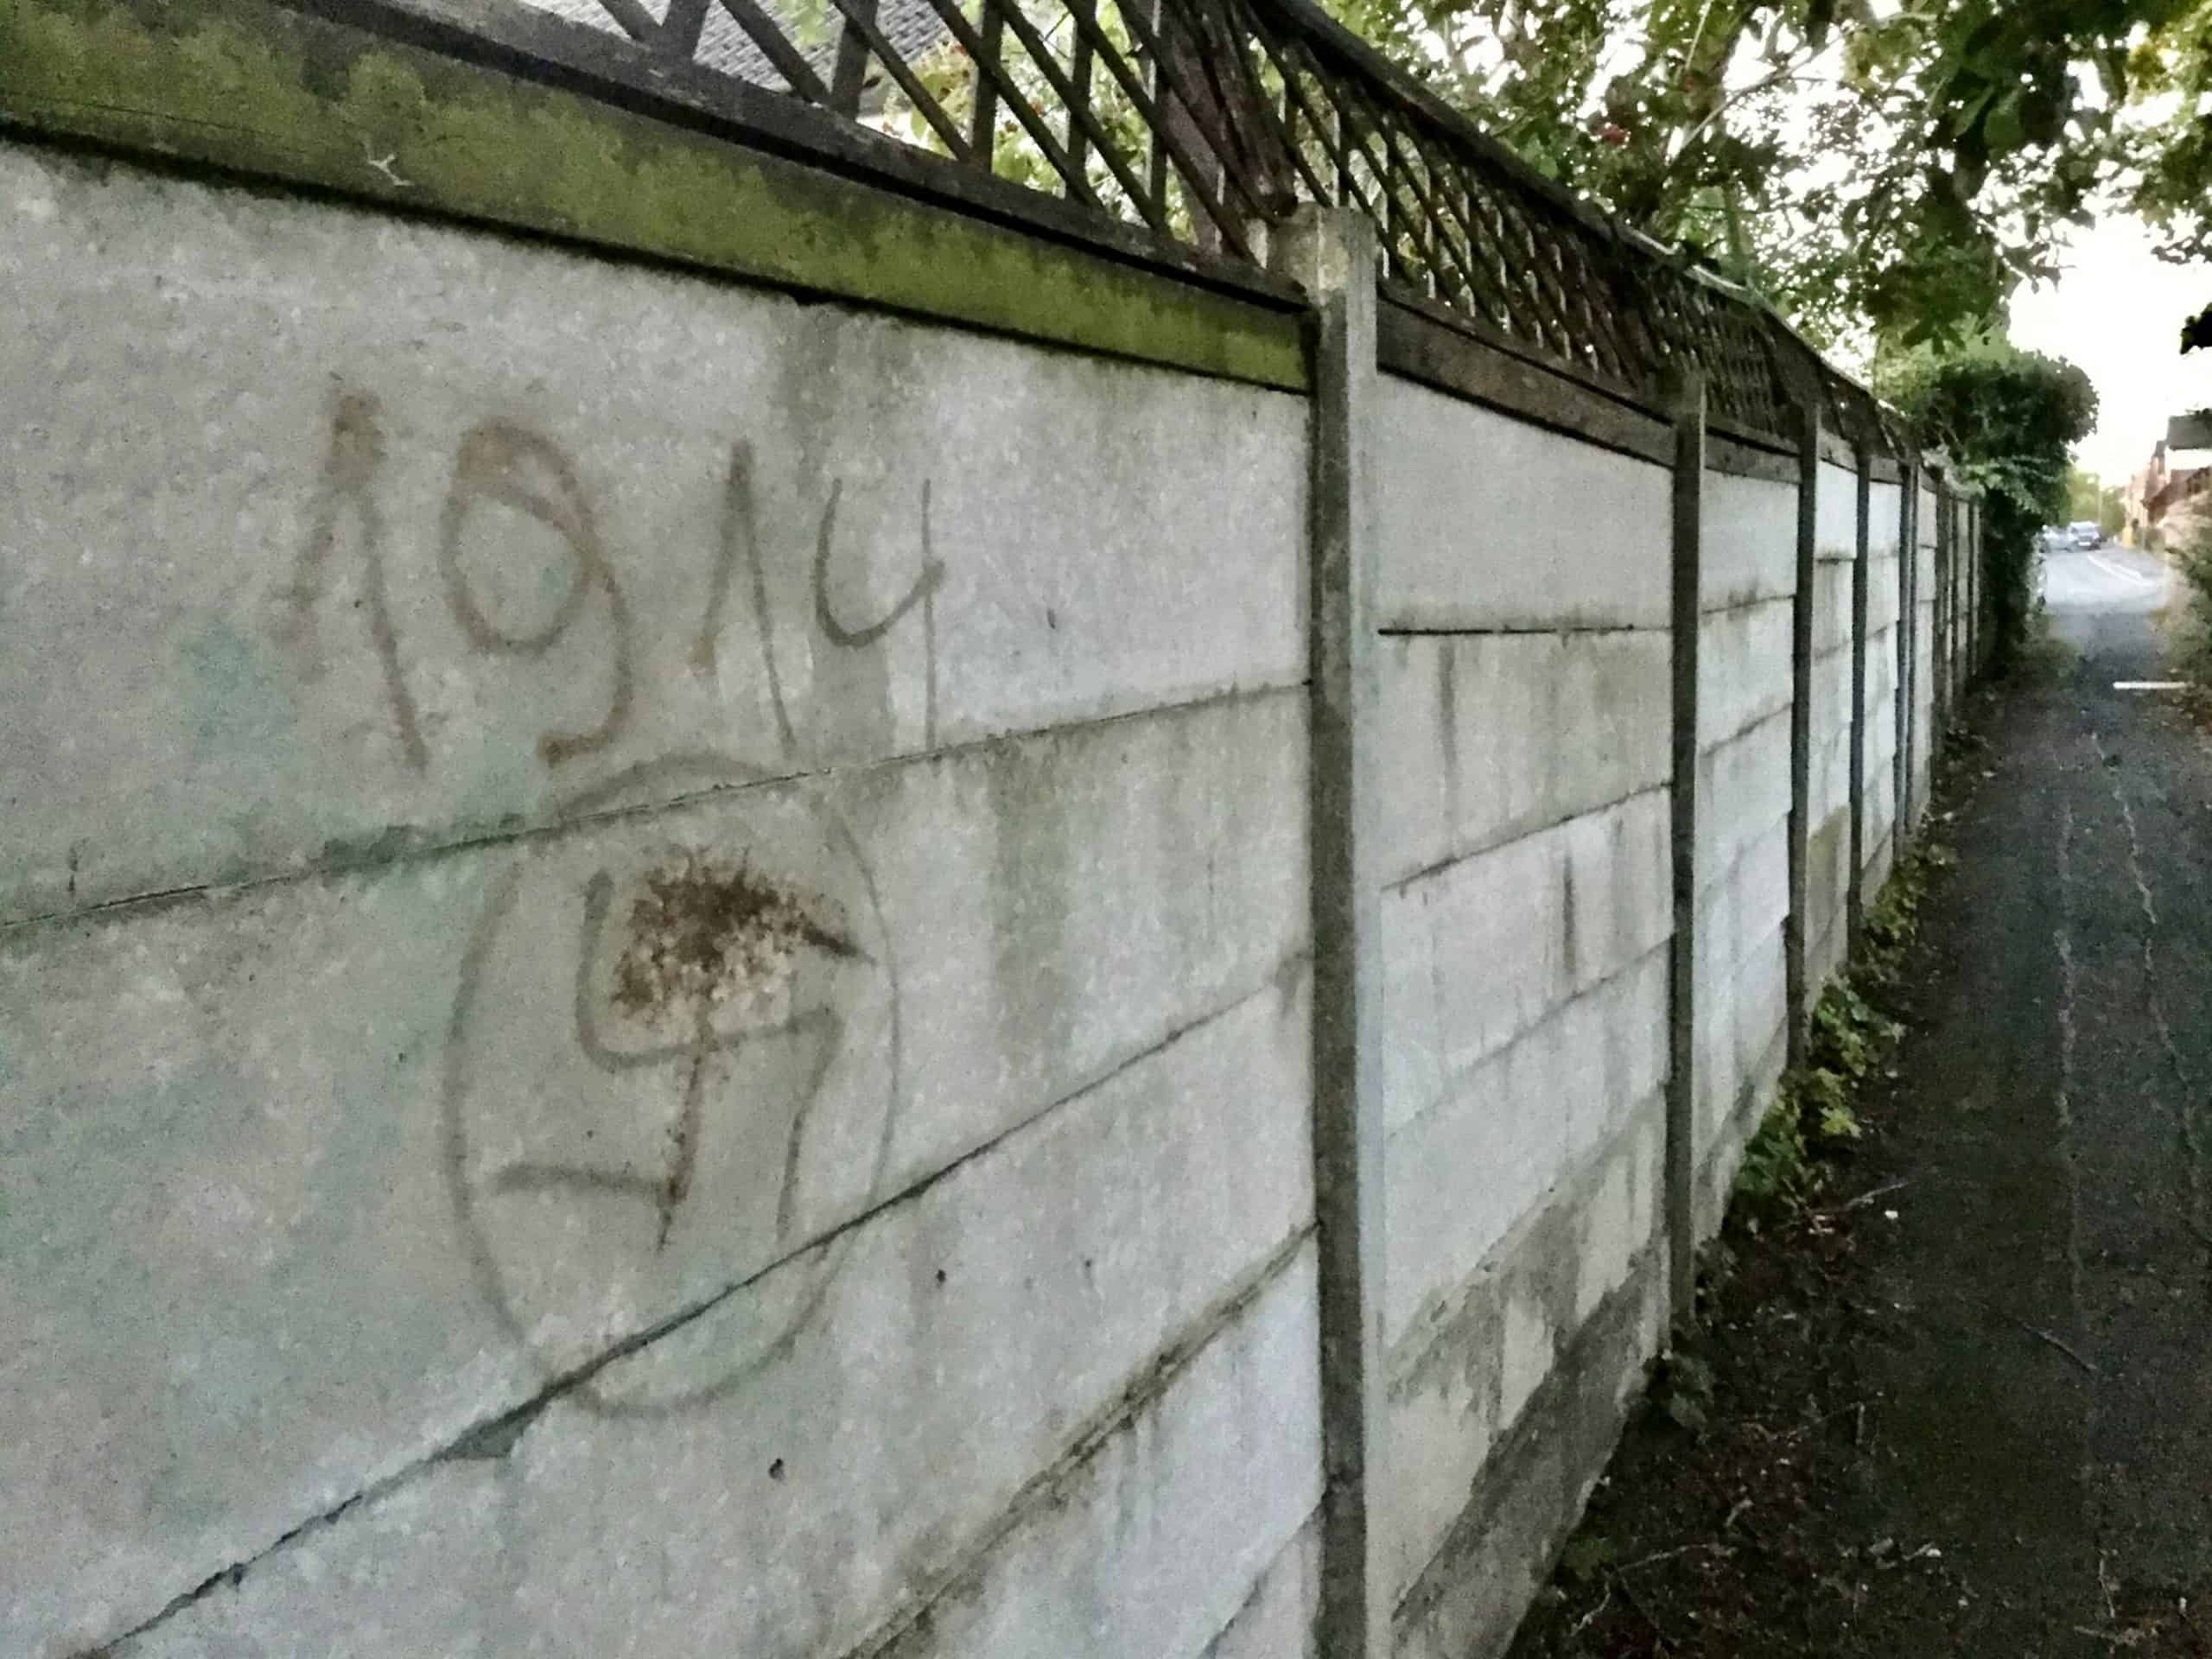 Racists target communities celebrating Jewish New Year by spray-painting swastika on wall